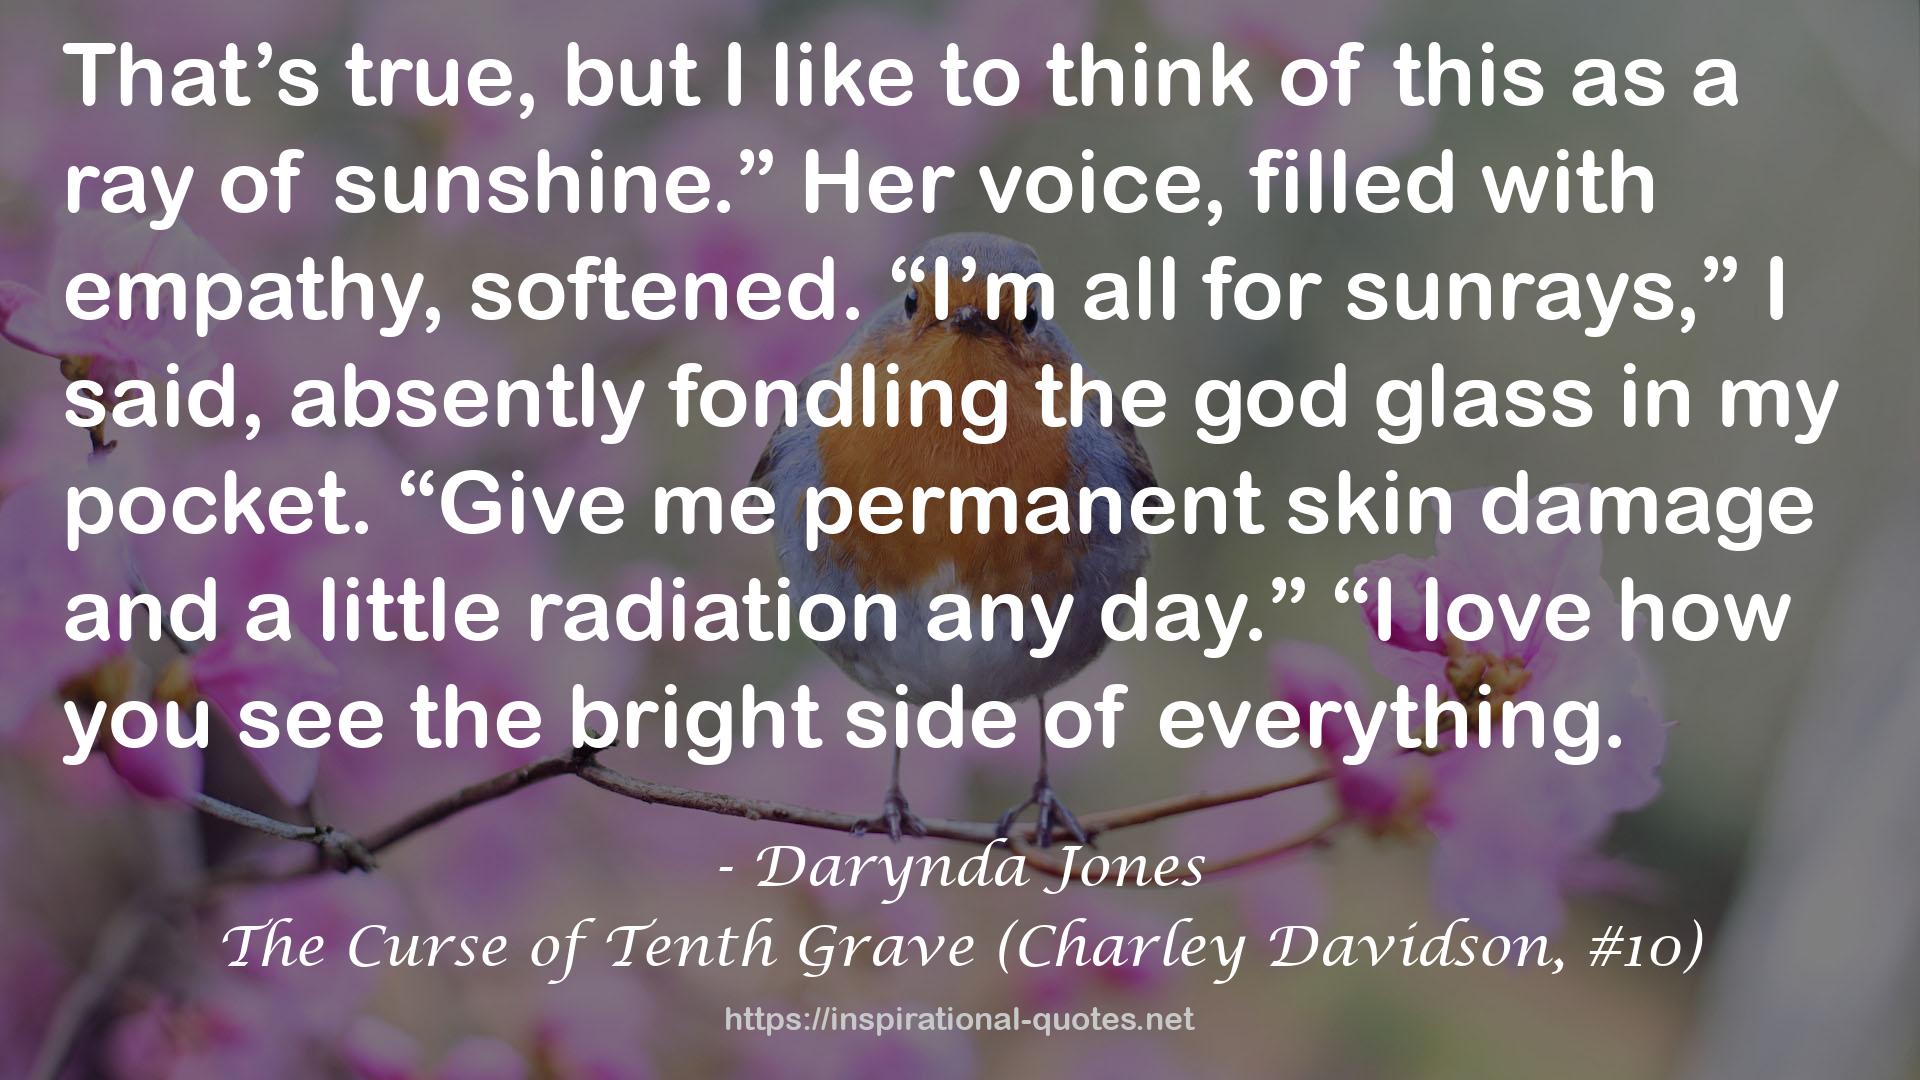 The Curse of Tenth Grave (Charley Davidson, #10) QUOTES